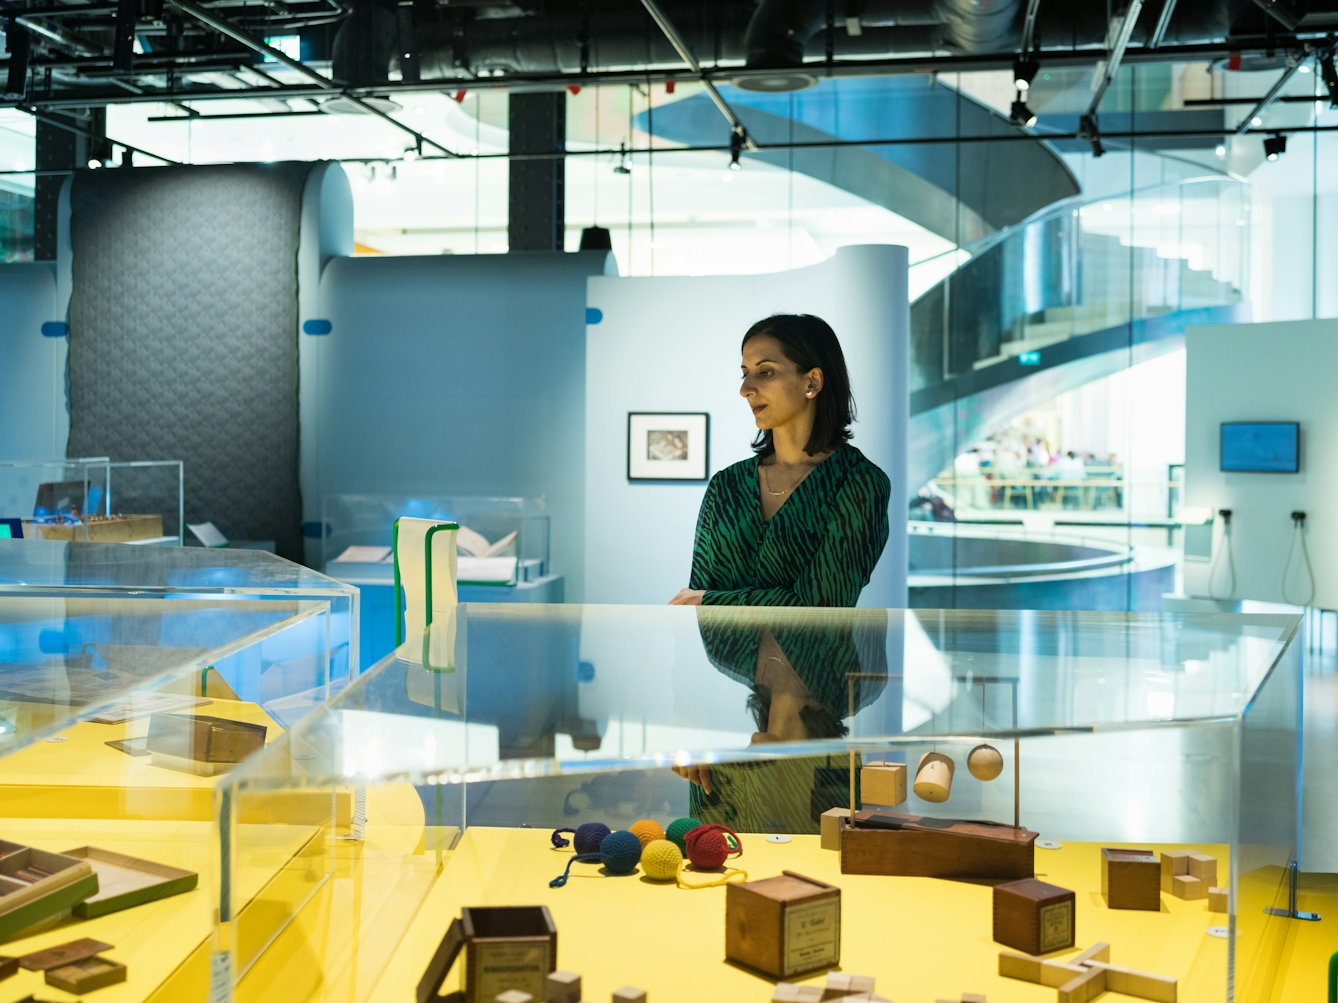 Photograph of a woman in an exhibition gallery space standing behind a glass display case. In the display case are wooden puzzle objects and wooden balls.